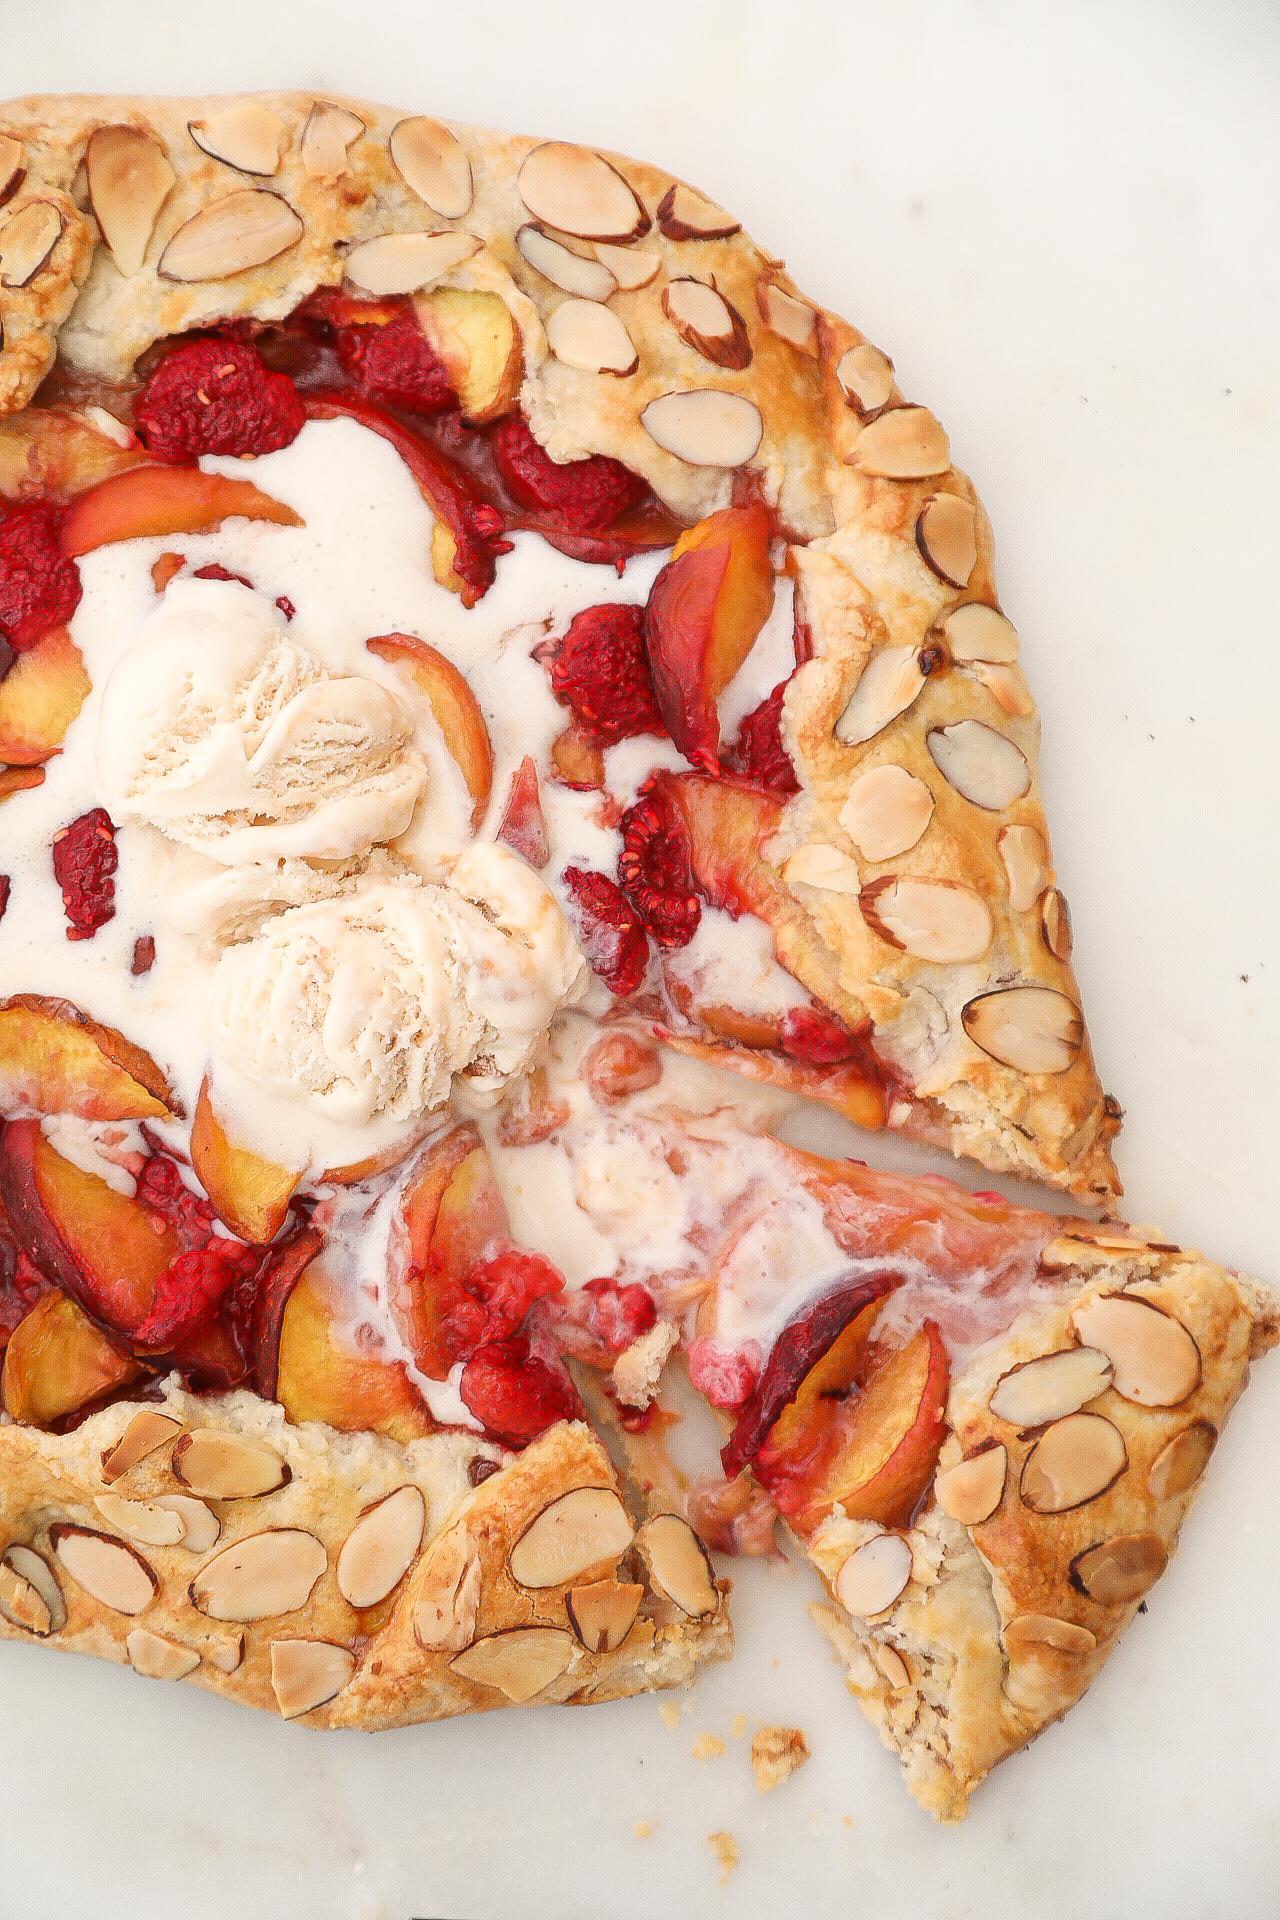 Peach and Raspberry Galette with Caramel Ice Cream.